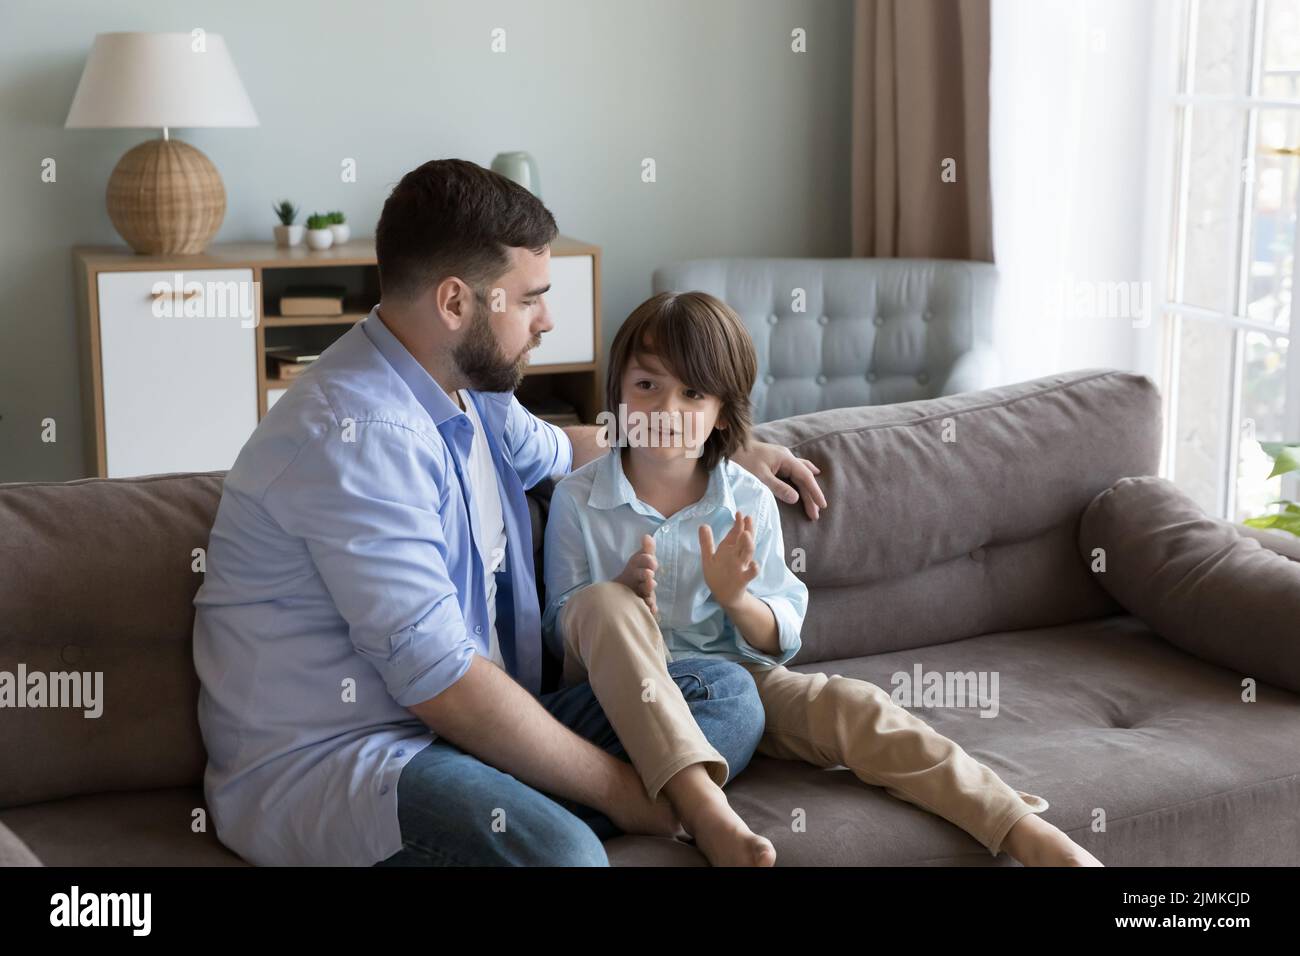 Loving dad listen with interest his little son Stock Photo